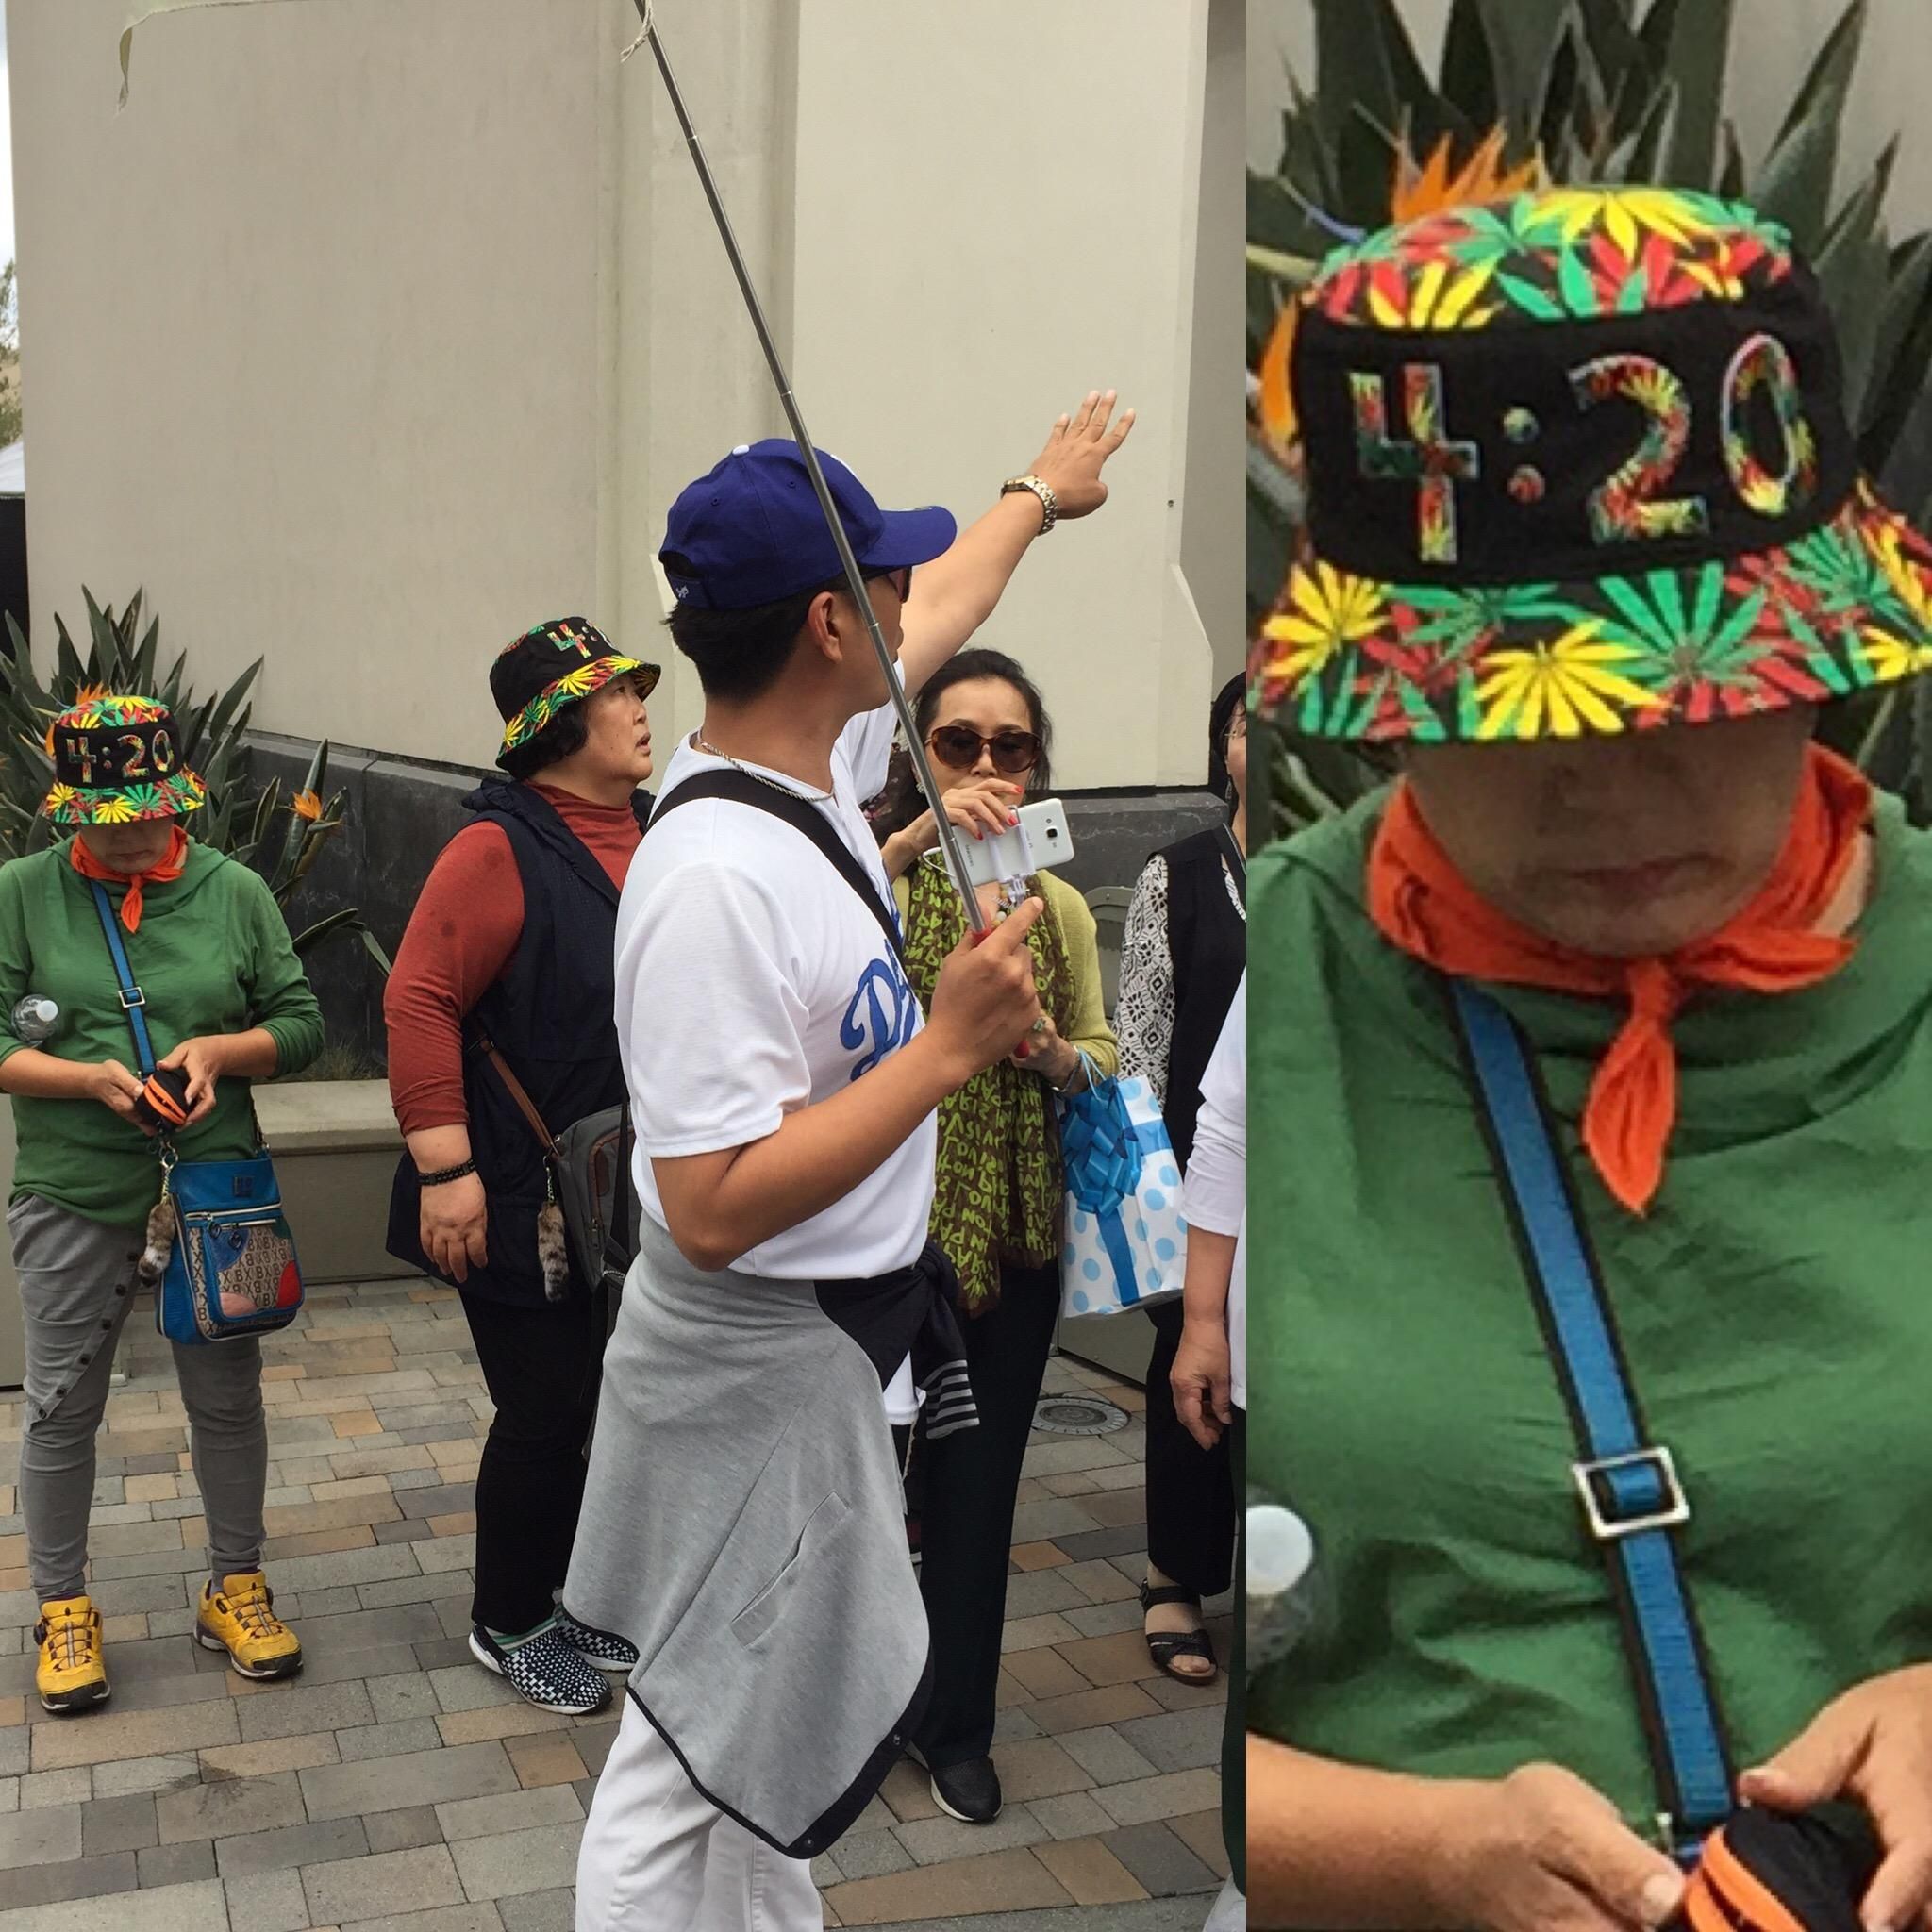 Some Asian tourists in L.A. blending in